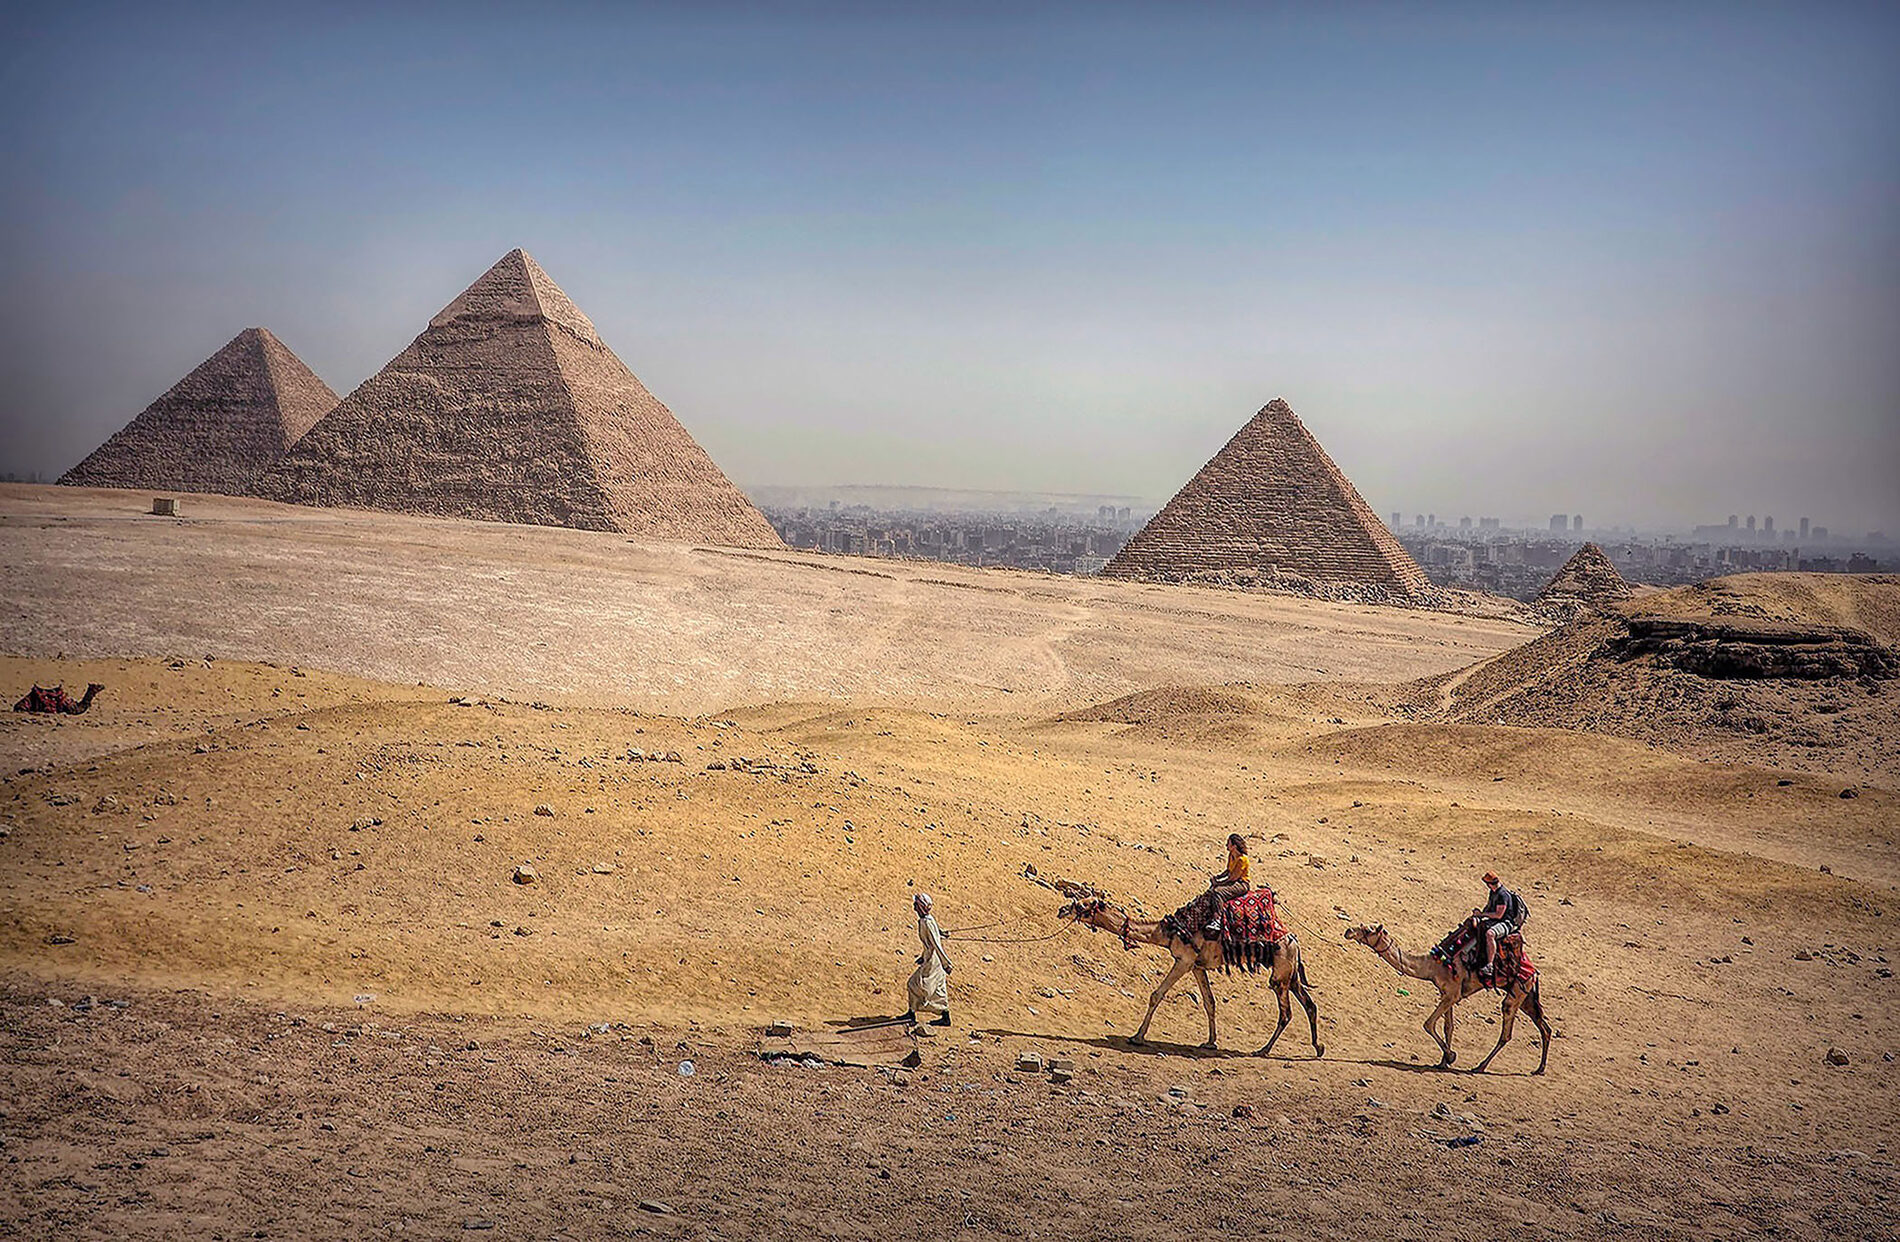 A person in a white full-body garment leading two people on camels in front of Egyptian pyramids.